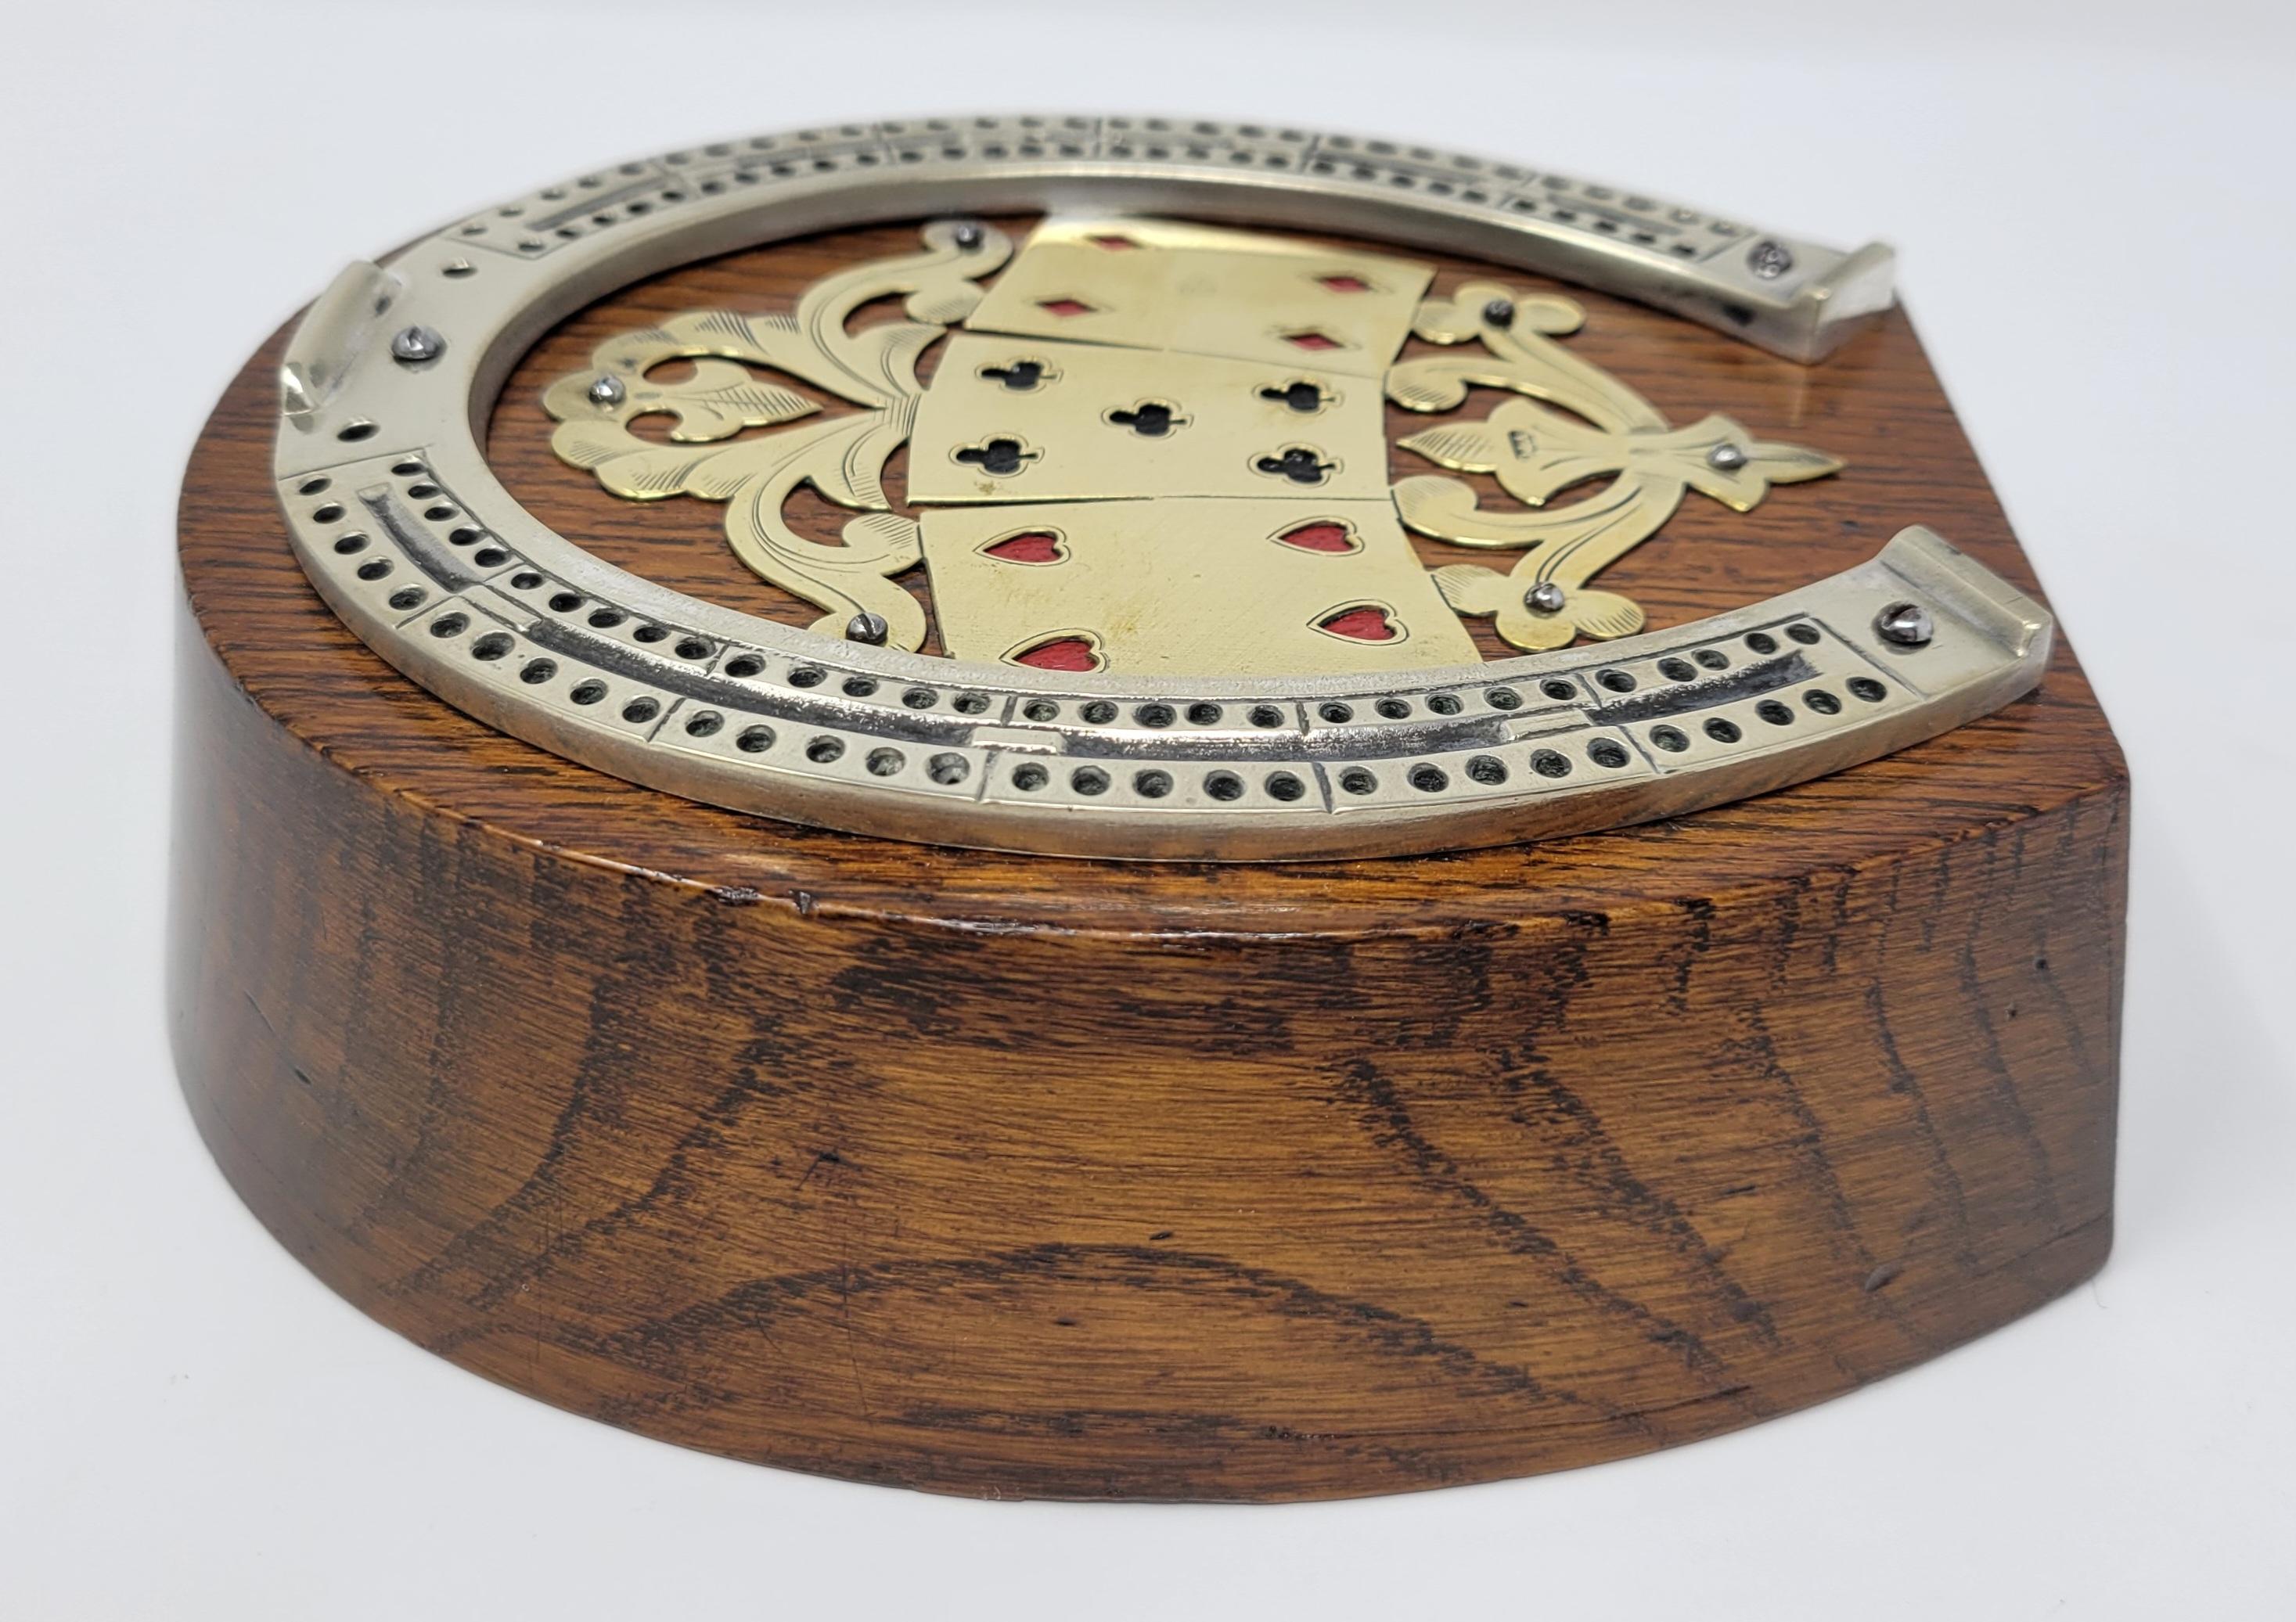 when was cribbage invented